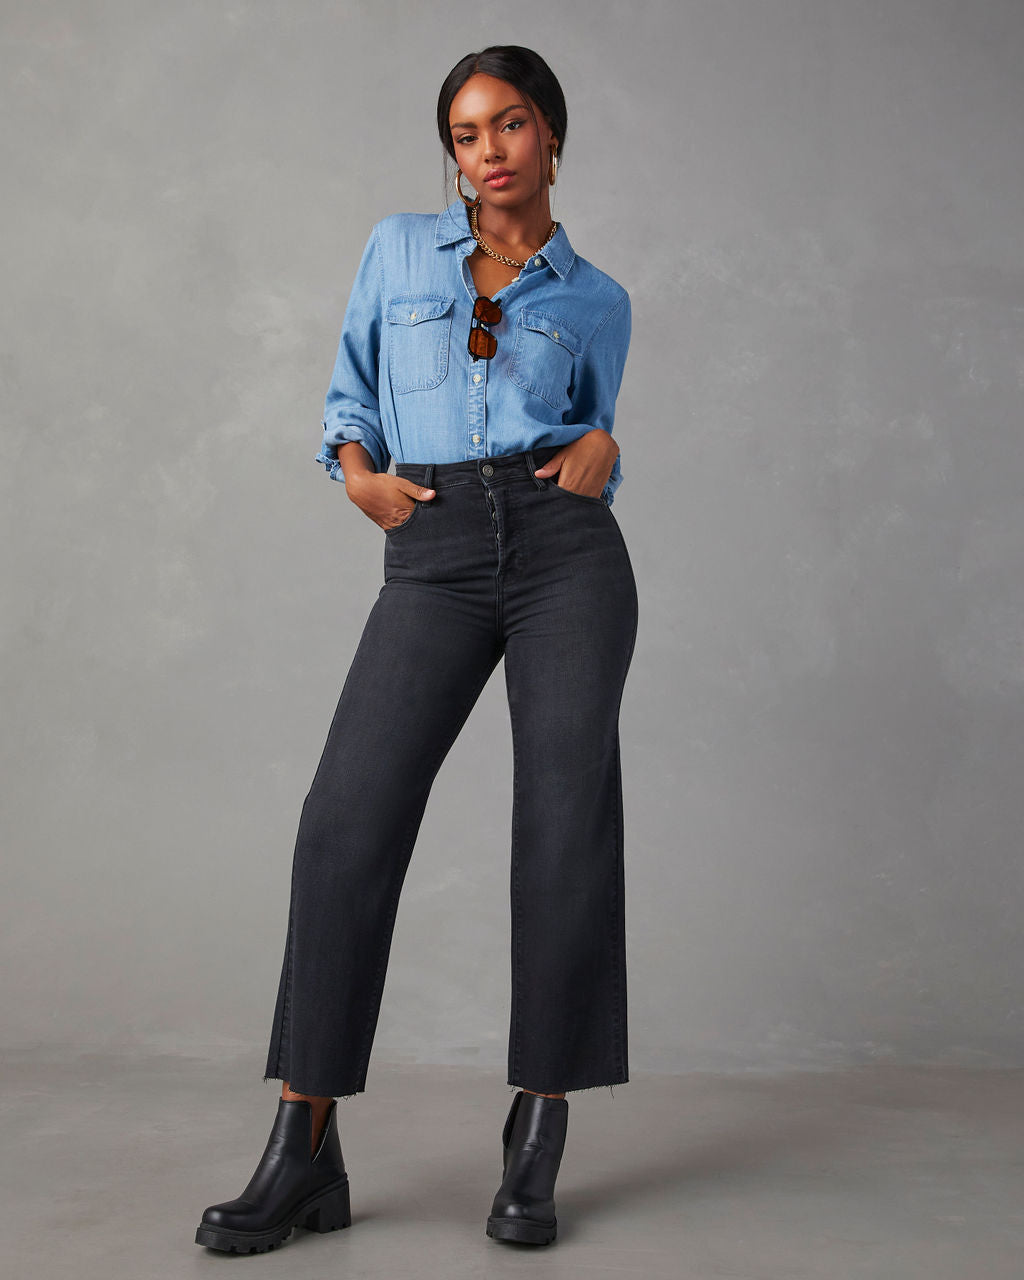 How to Wear a Wide Leg Jeans Outfit - Venti Fashion